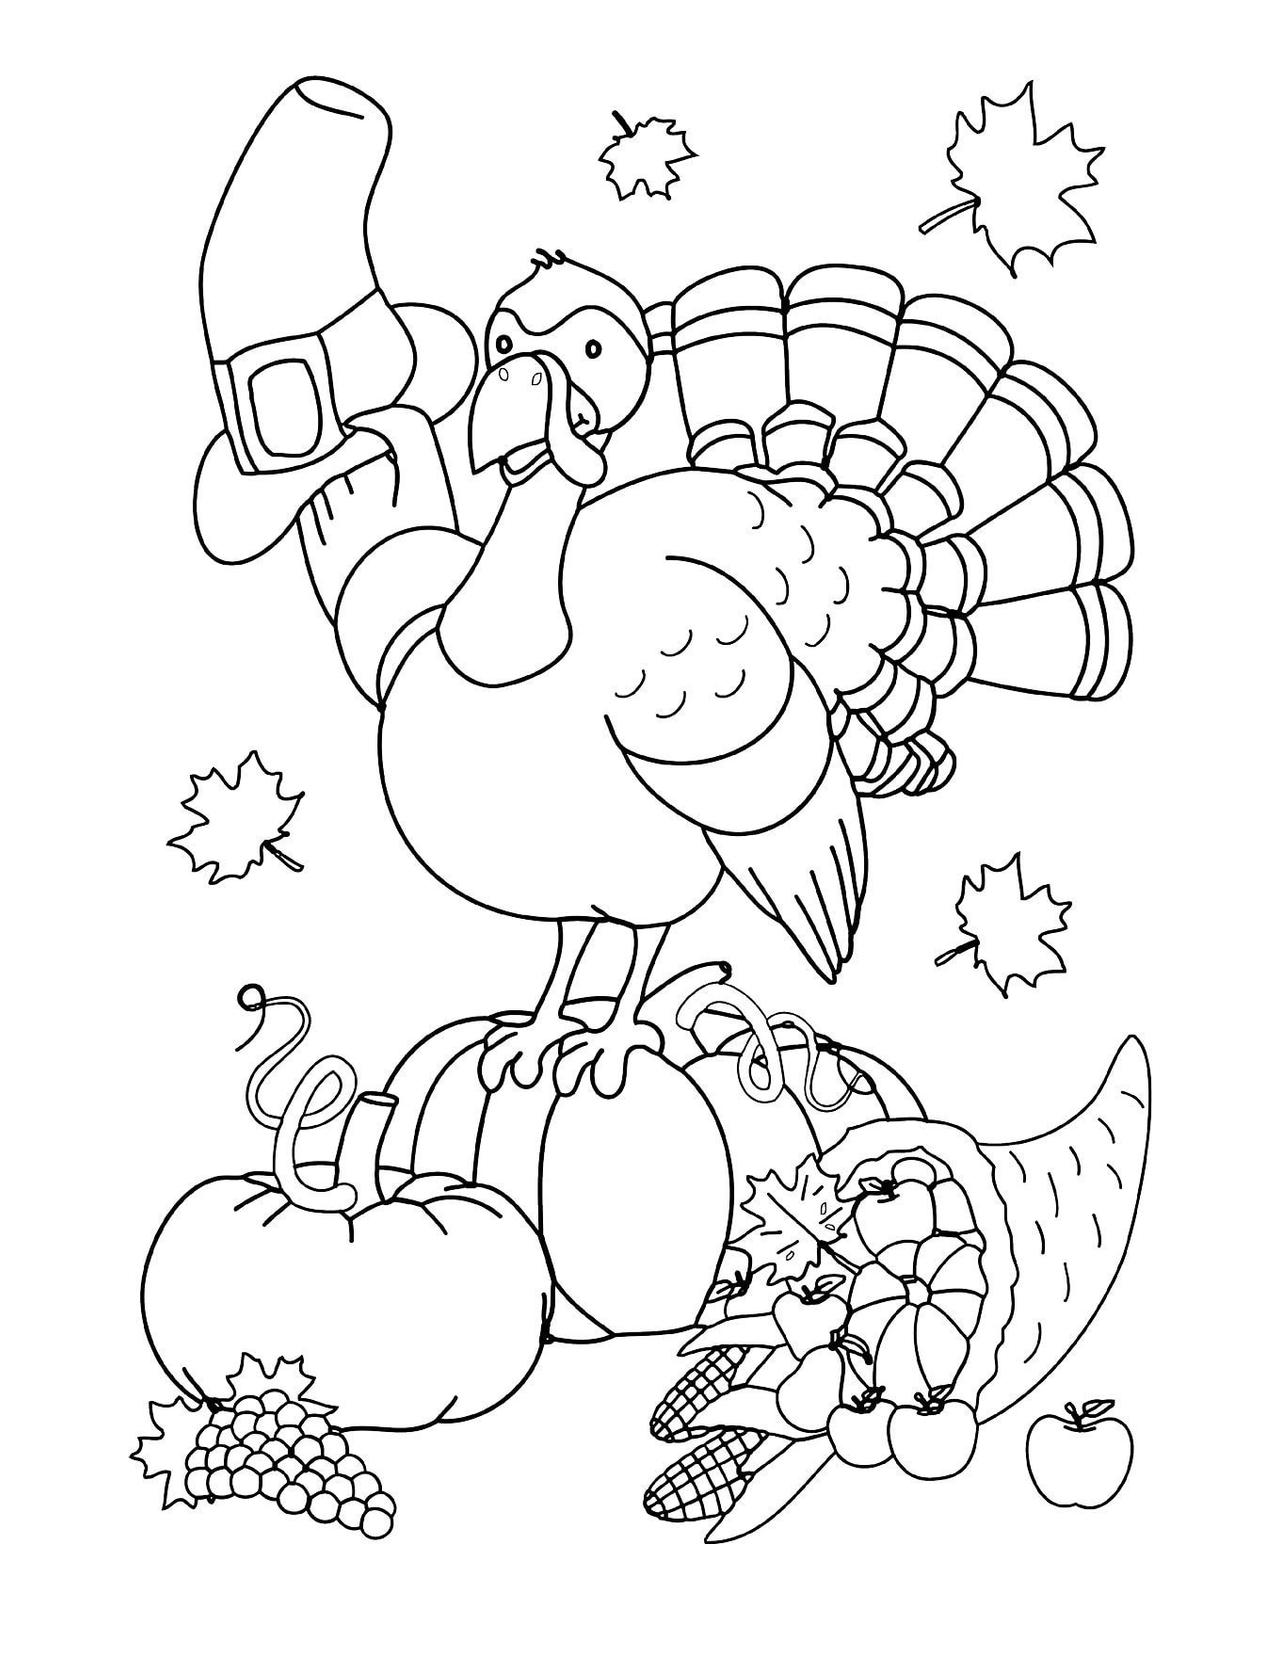 Thanksgiving coloring pages by coloringpageswk on